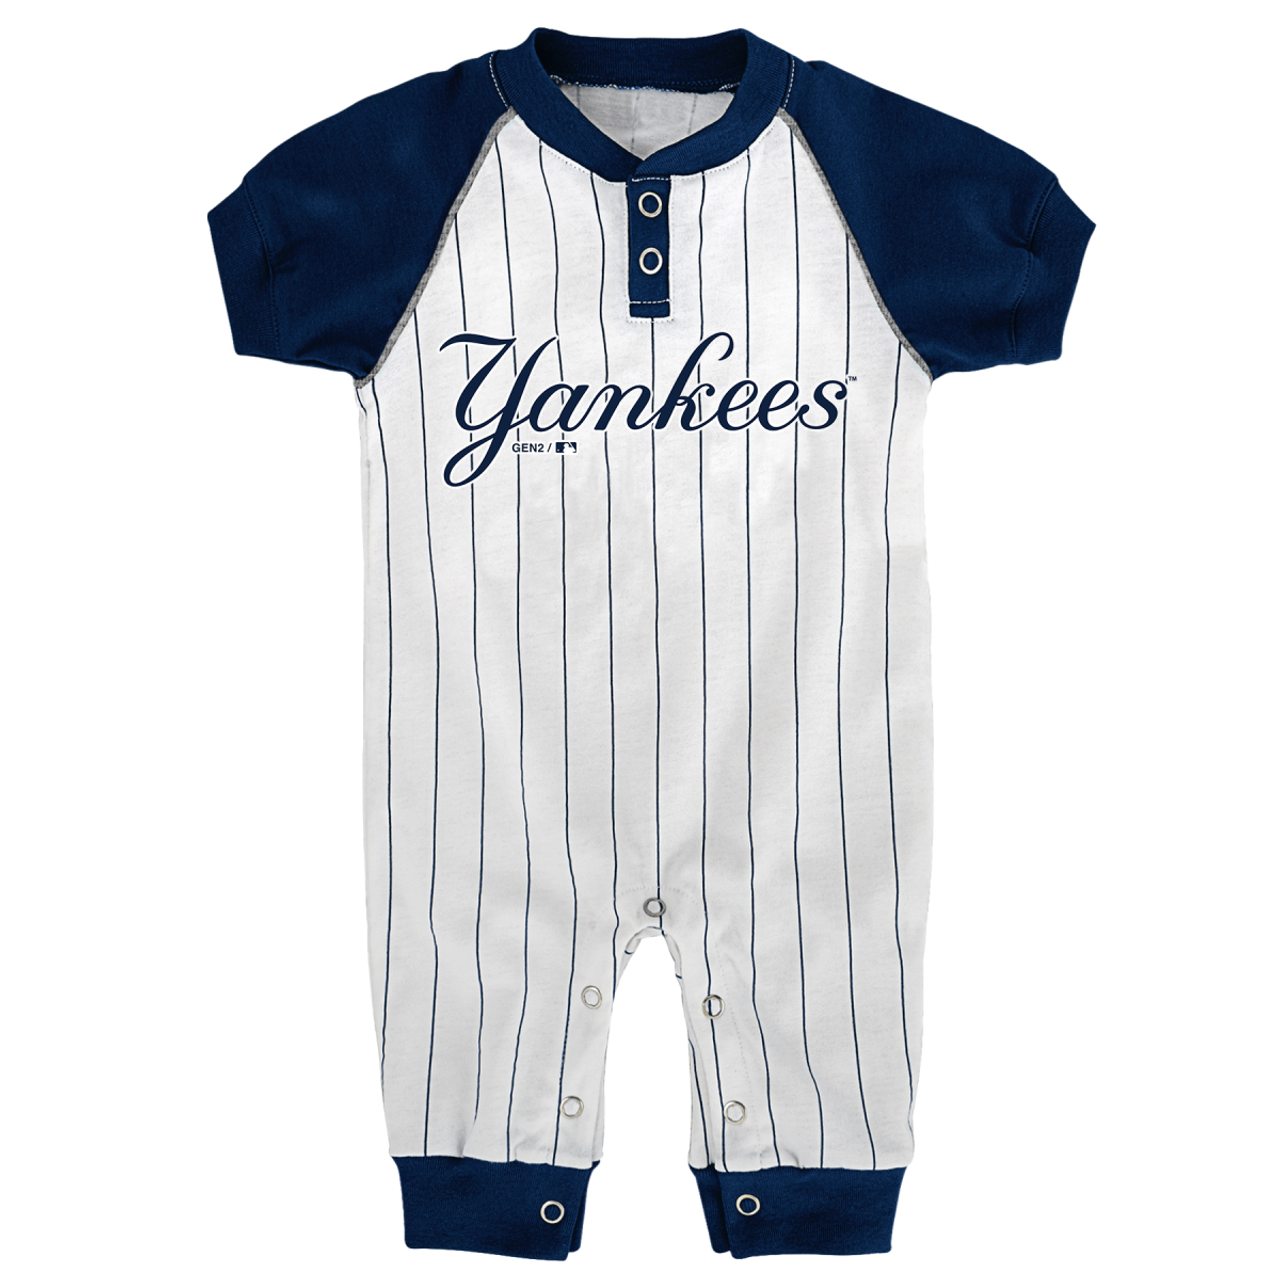 personalized yankees baby jersey